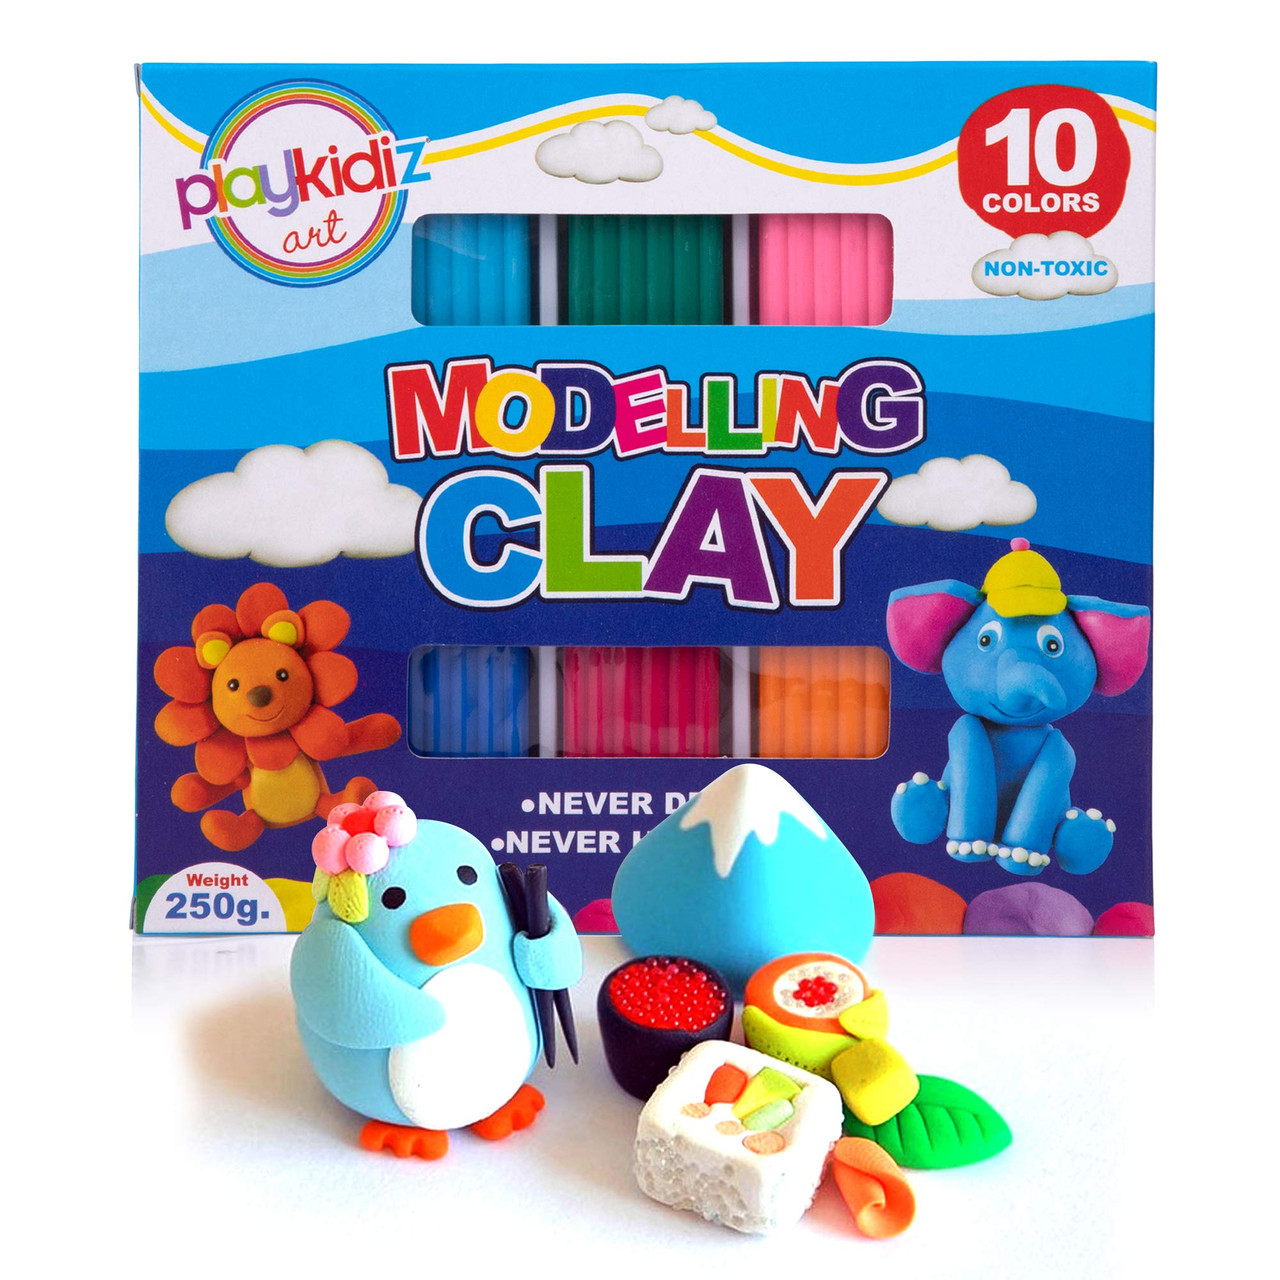 Playkidiz Art Modeling Clay 8 Neon Colors in PVC Clam Shell Box, Beginners Pack 480 Grams, Stem Educational DIY Molding Set, at Home Crafts for Kids